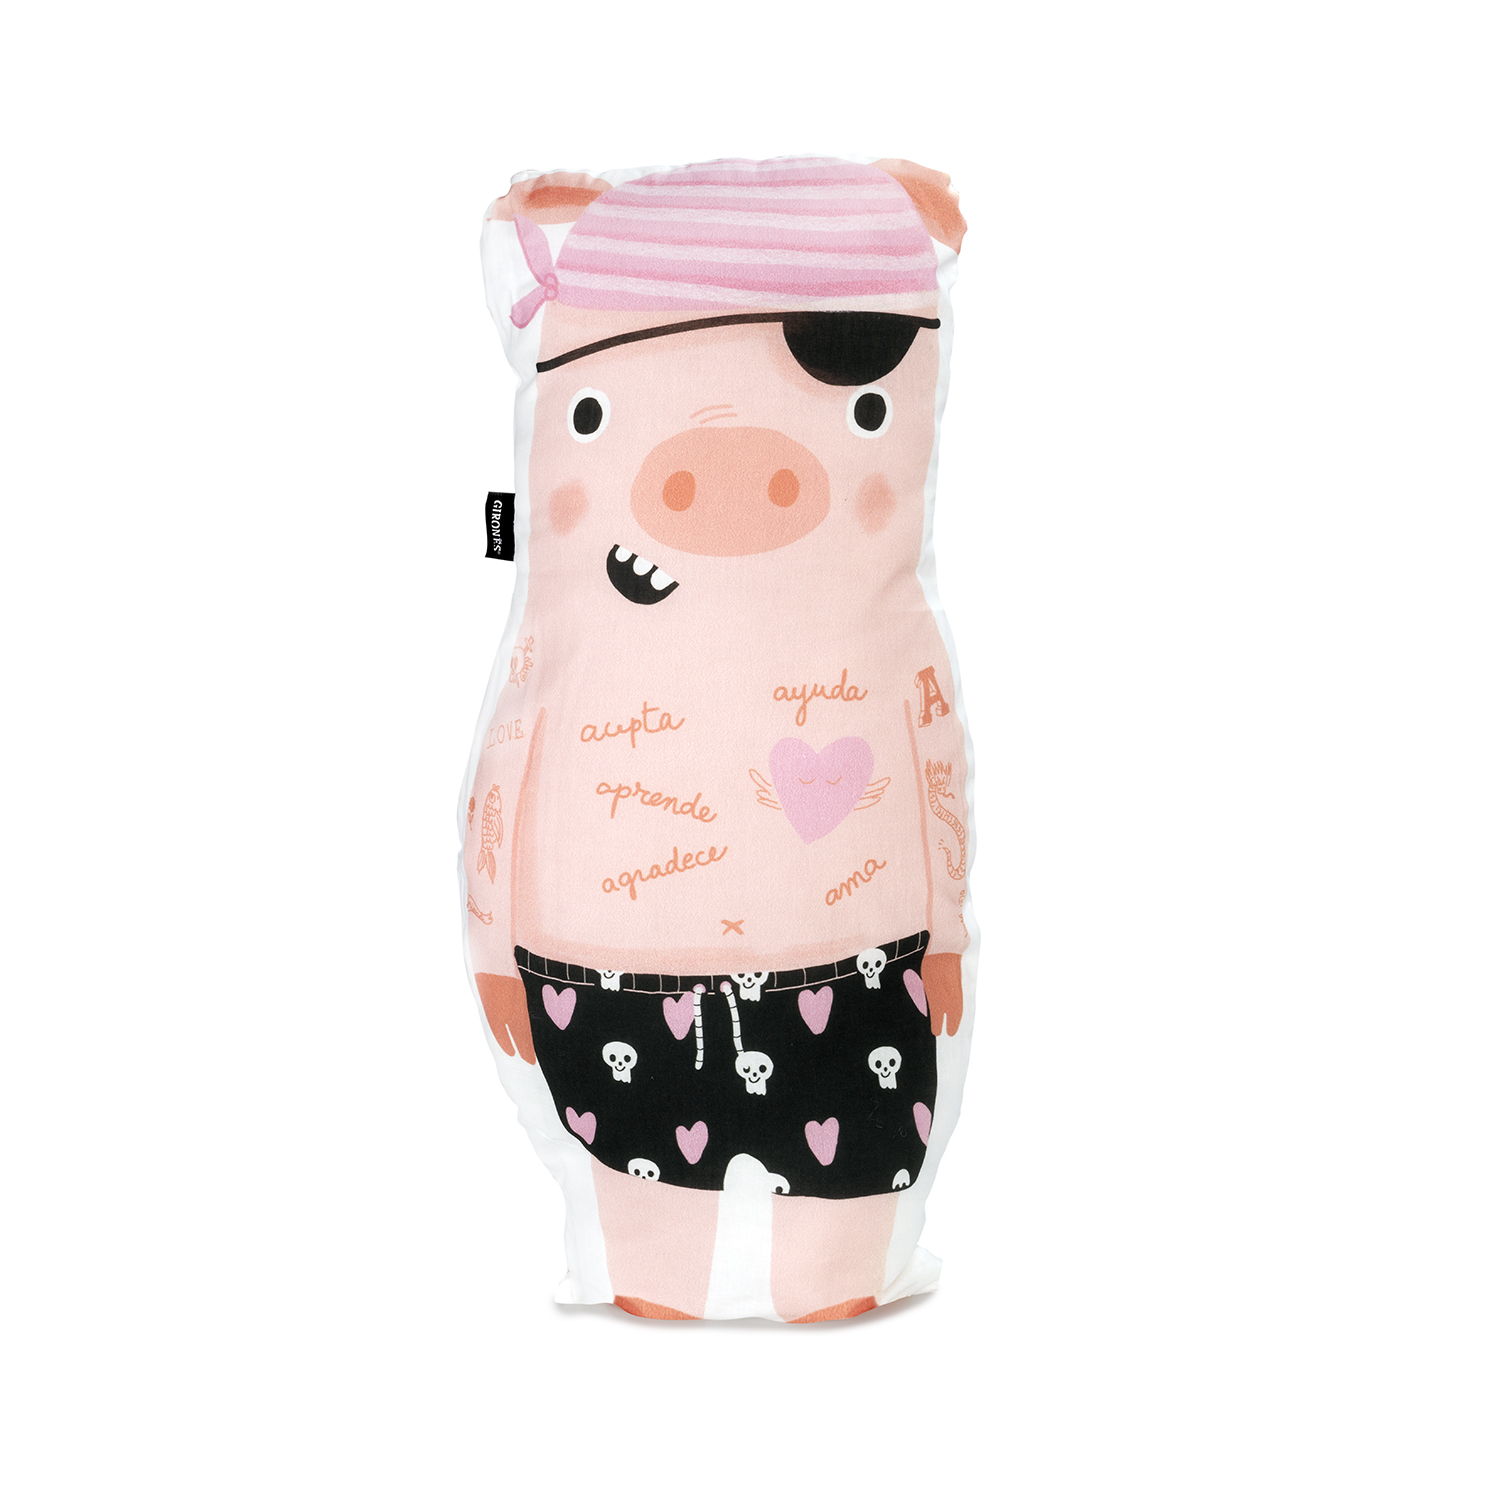 pirate pig shaped cushion by GironesHome